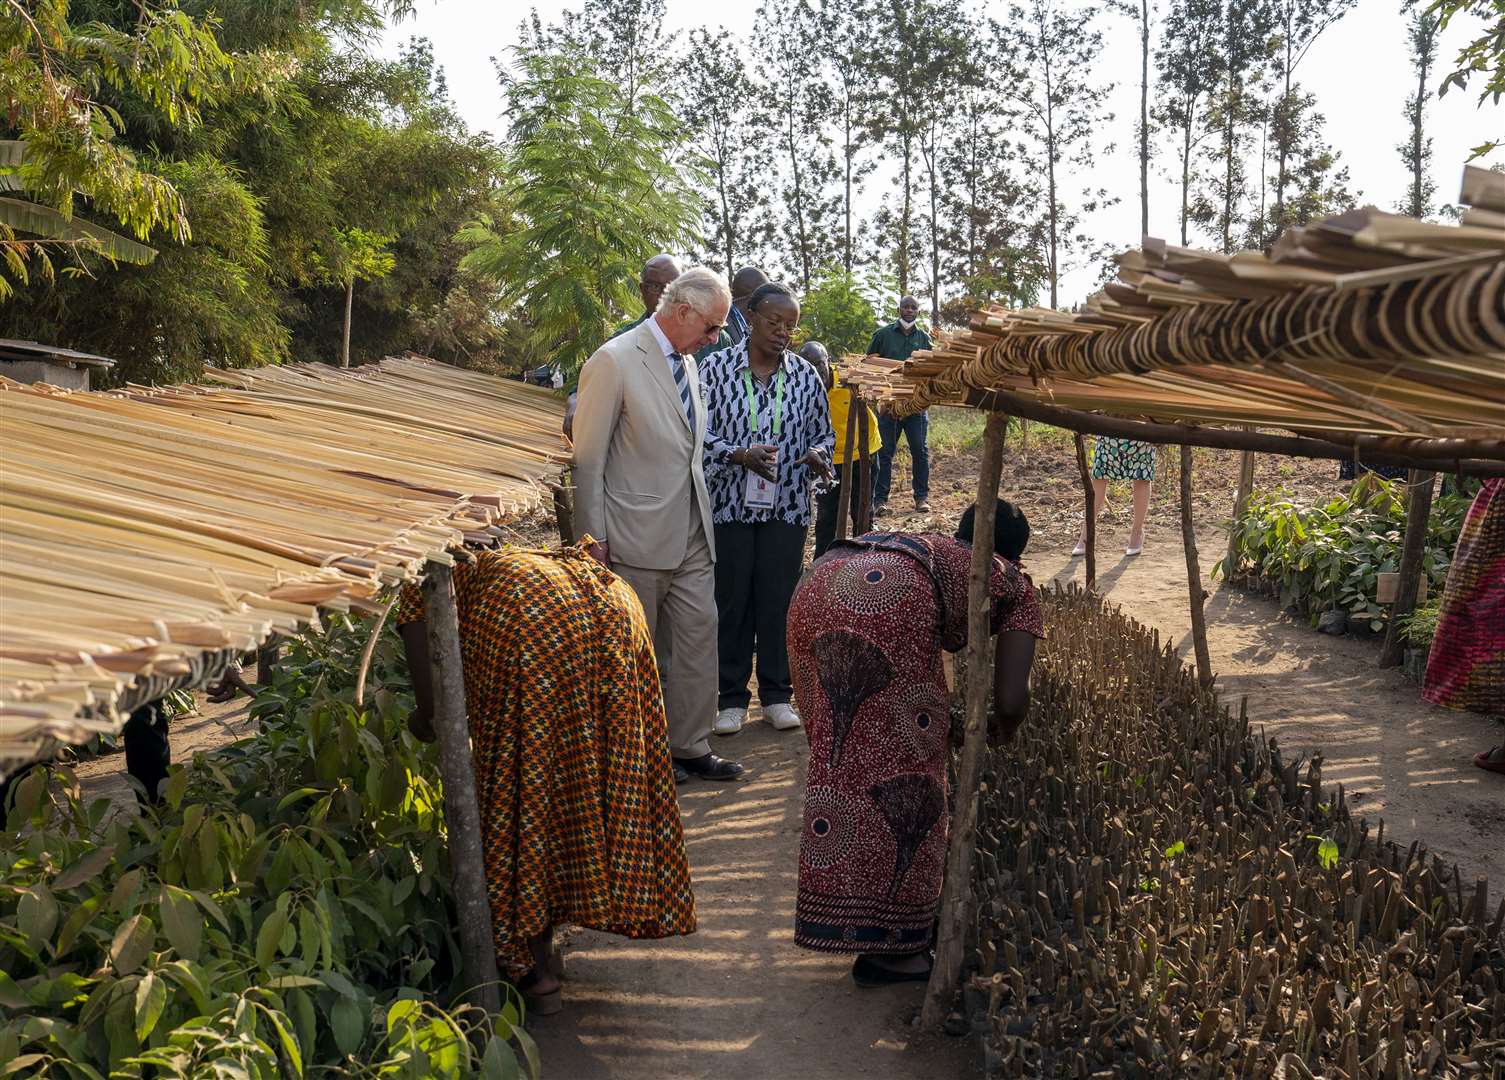 The Prince of Wales during his visit to an agroforestry site in Kigali, Rwanda (Arthur Edwards/The Sun/PA)